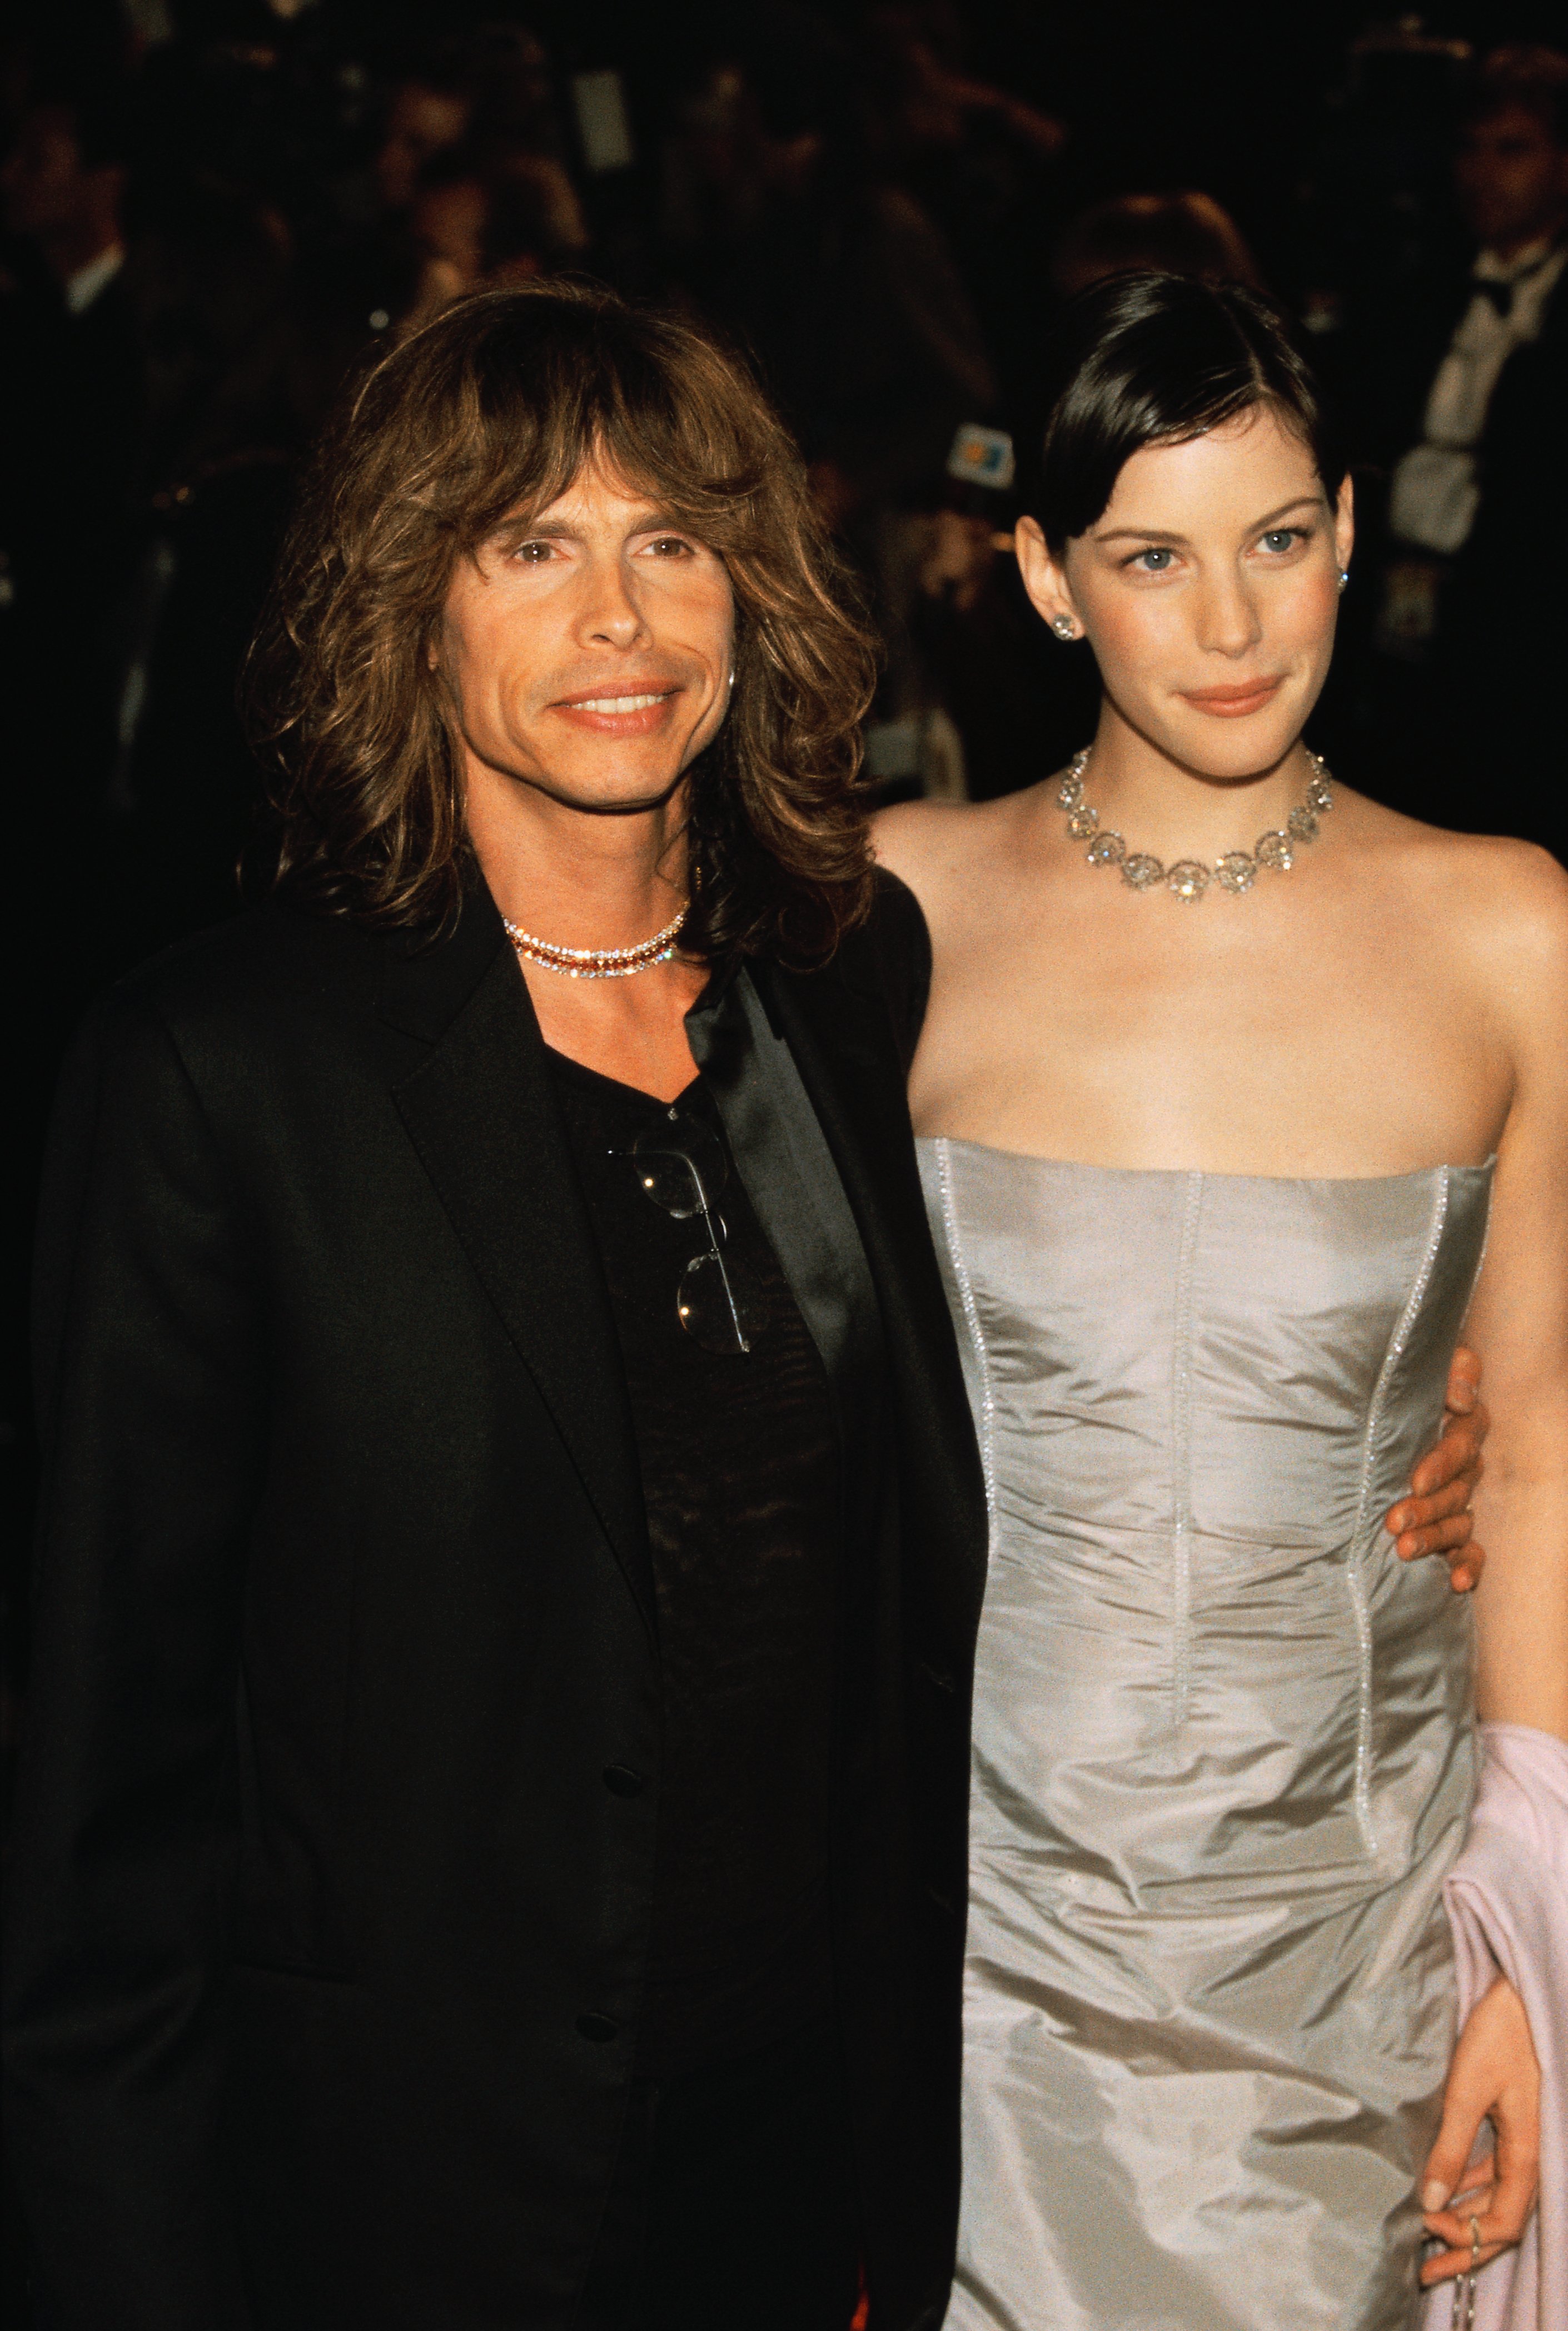 Photo of Steven Tyler and Liv Tyler | Source: Getty Images